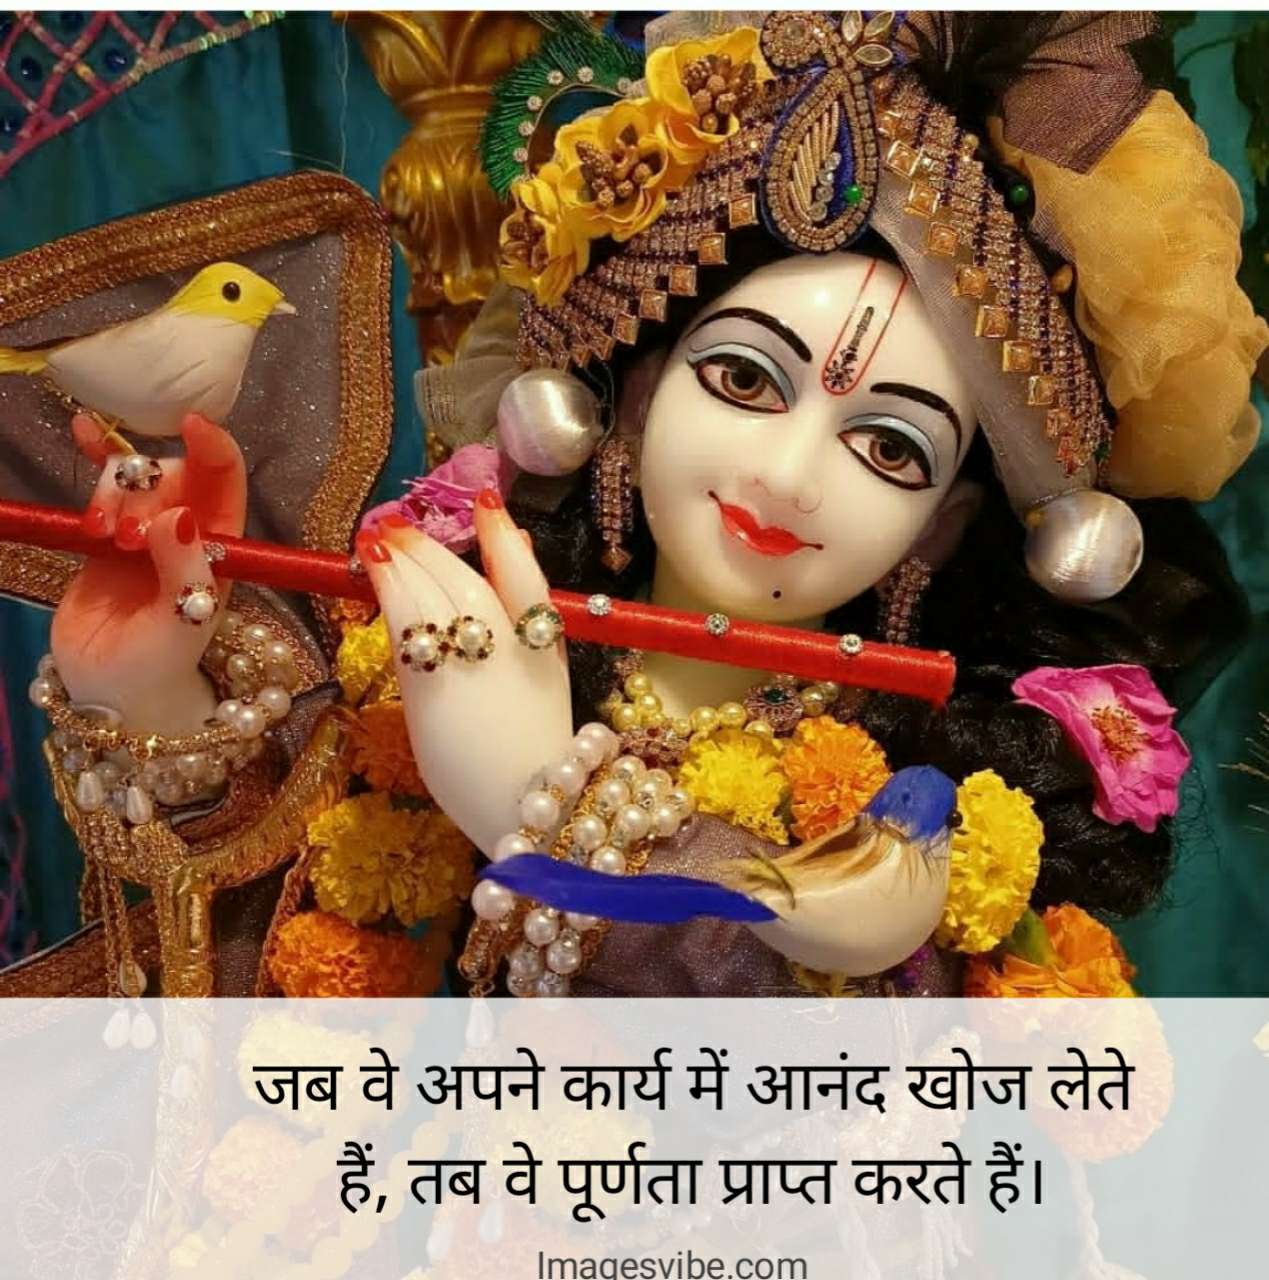 Difficult Time Inspirational Krishna Quotes in Hindi